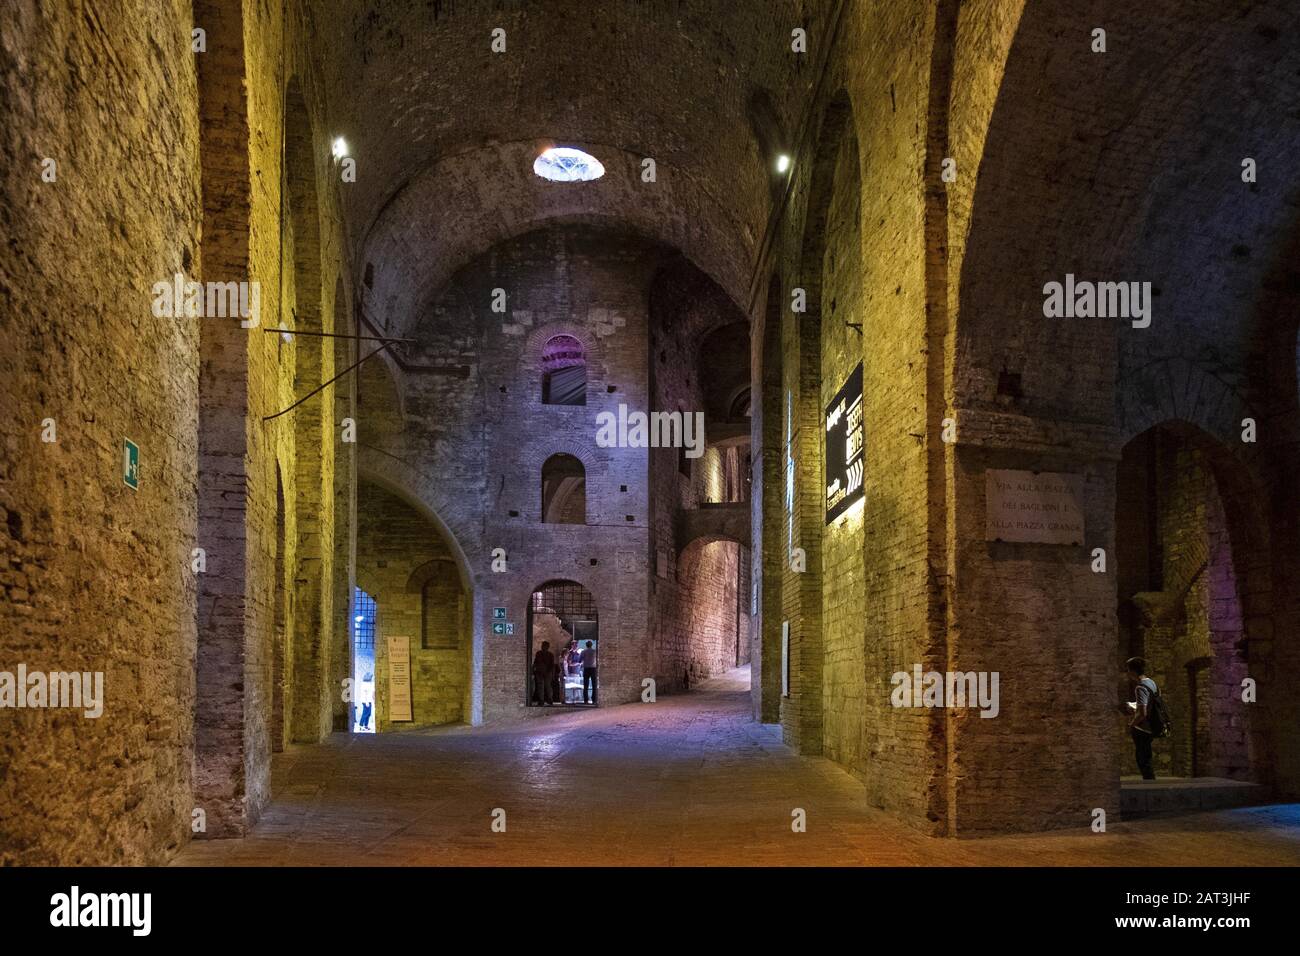 Perugia, Umbria / Italy - 2018/05/28: Underground tunnels and chambers of the XVI century Rocca Paolina stone fortress in Perugia historic quarter Stock Photo